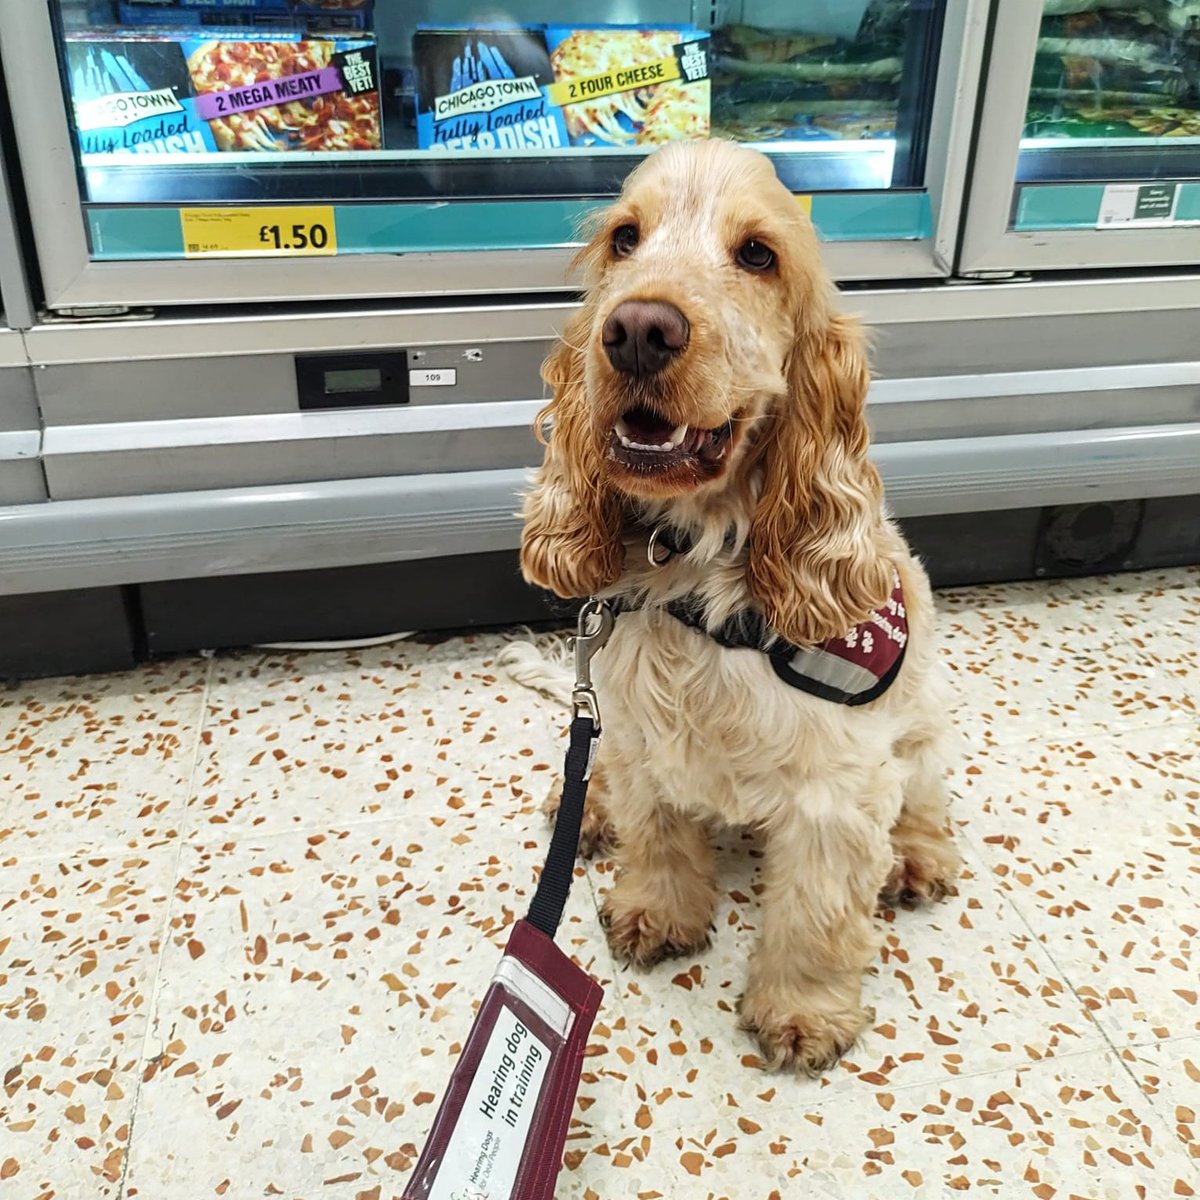 Cocker spaniel Alfie has been to a supermarket as part of his training 🛒

Alfie has been learning to ignore all the interesting and tasty items on the shelves, as well as getting used to trolleys and being around large numbers of people.

Amazing job, Alfie 👏🐶